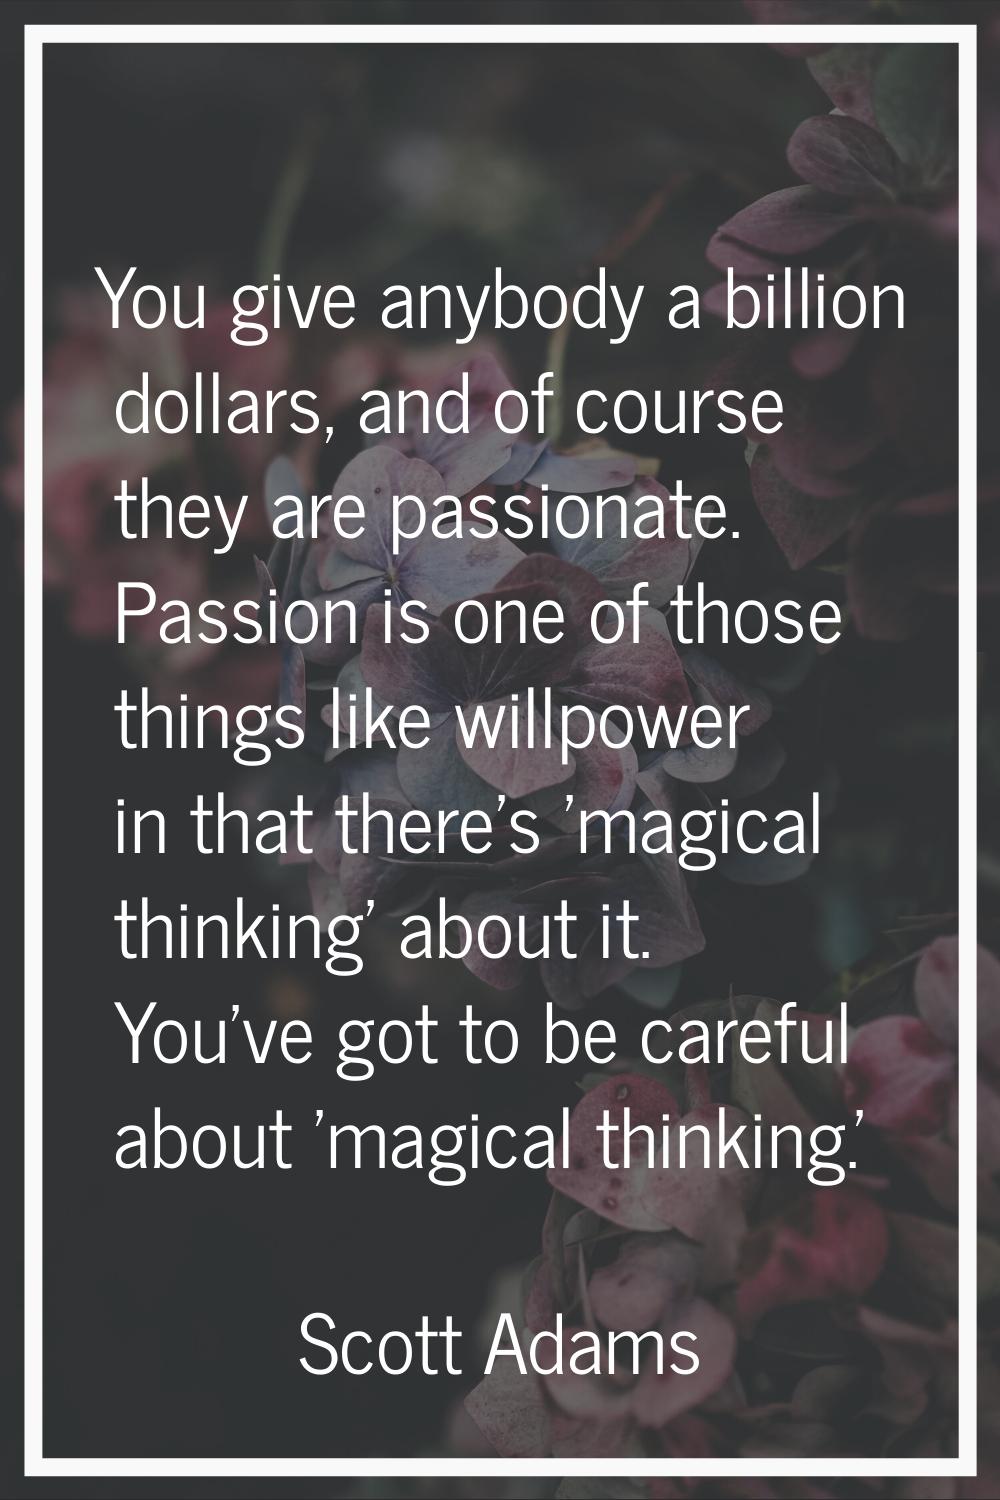 You give anybody a billion dollars, and of course they are passionate. Passion is one of those thin